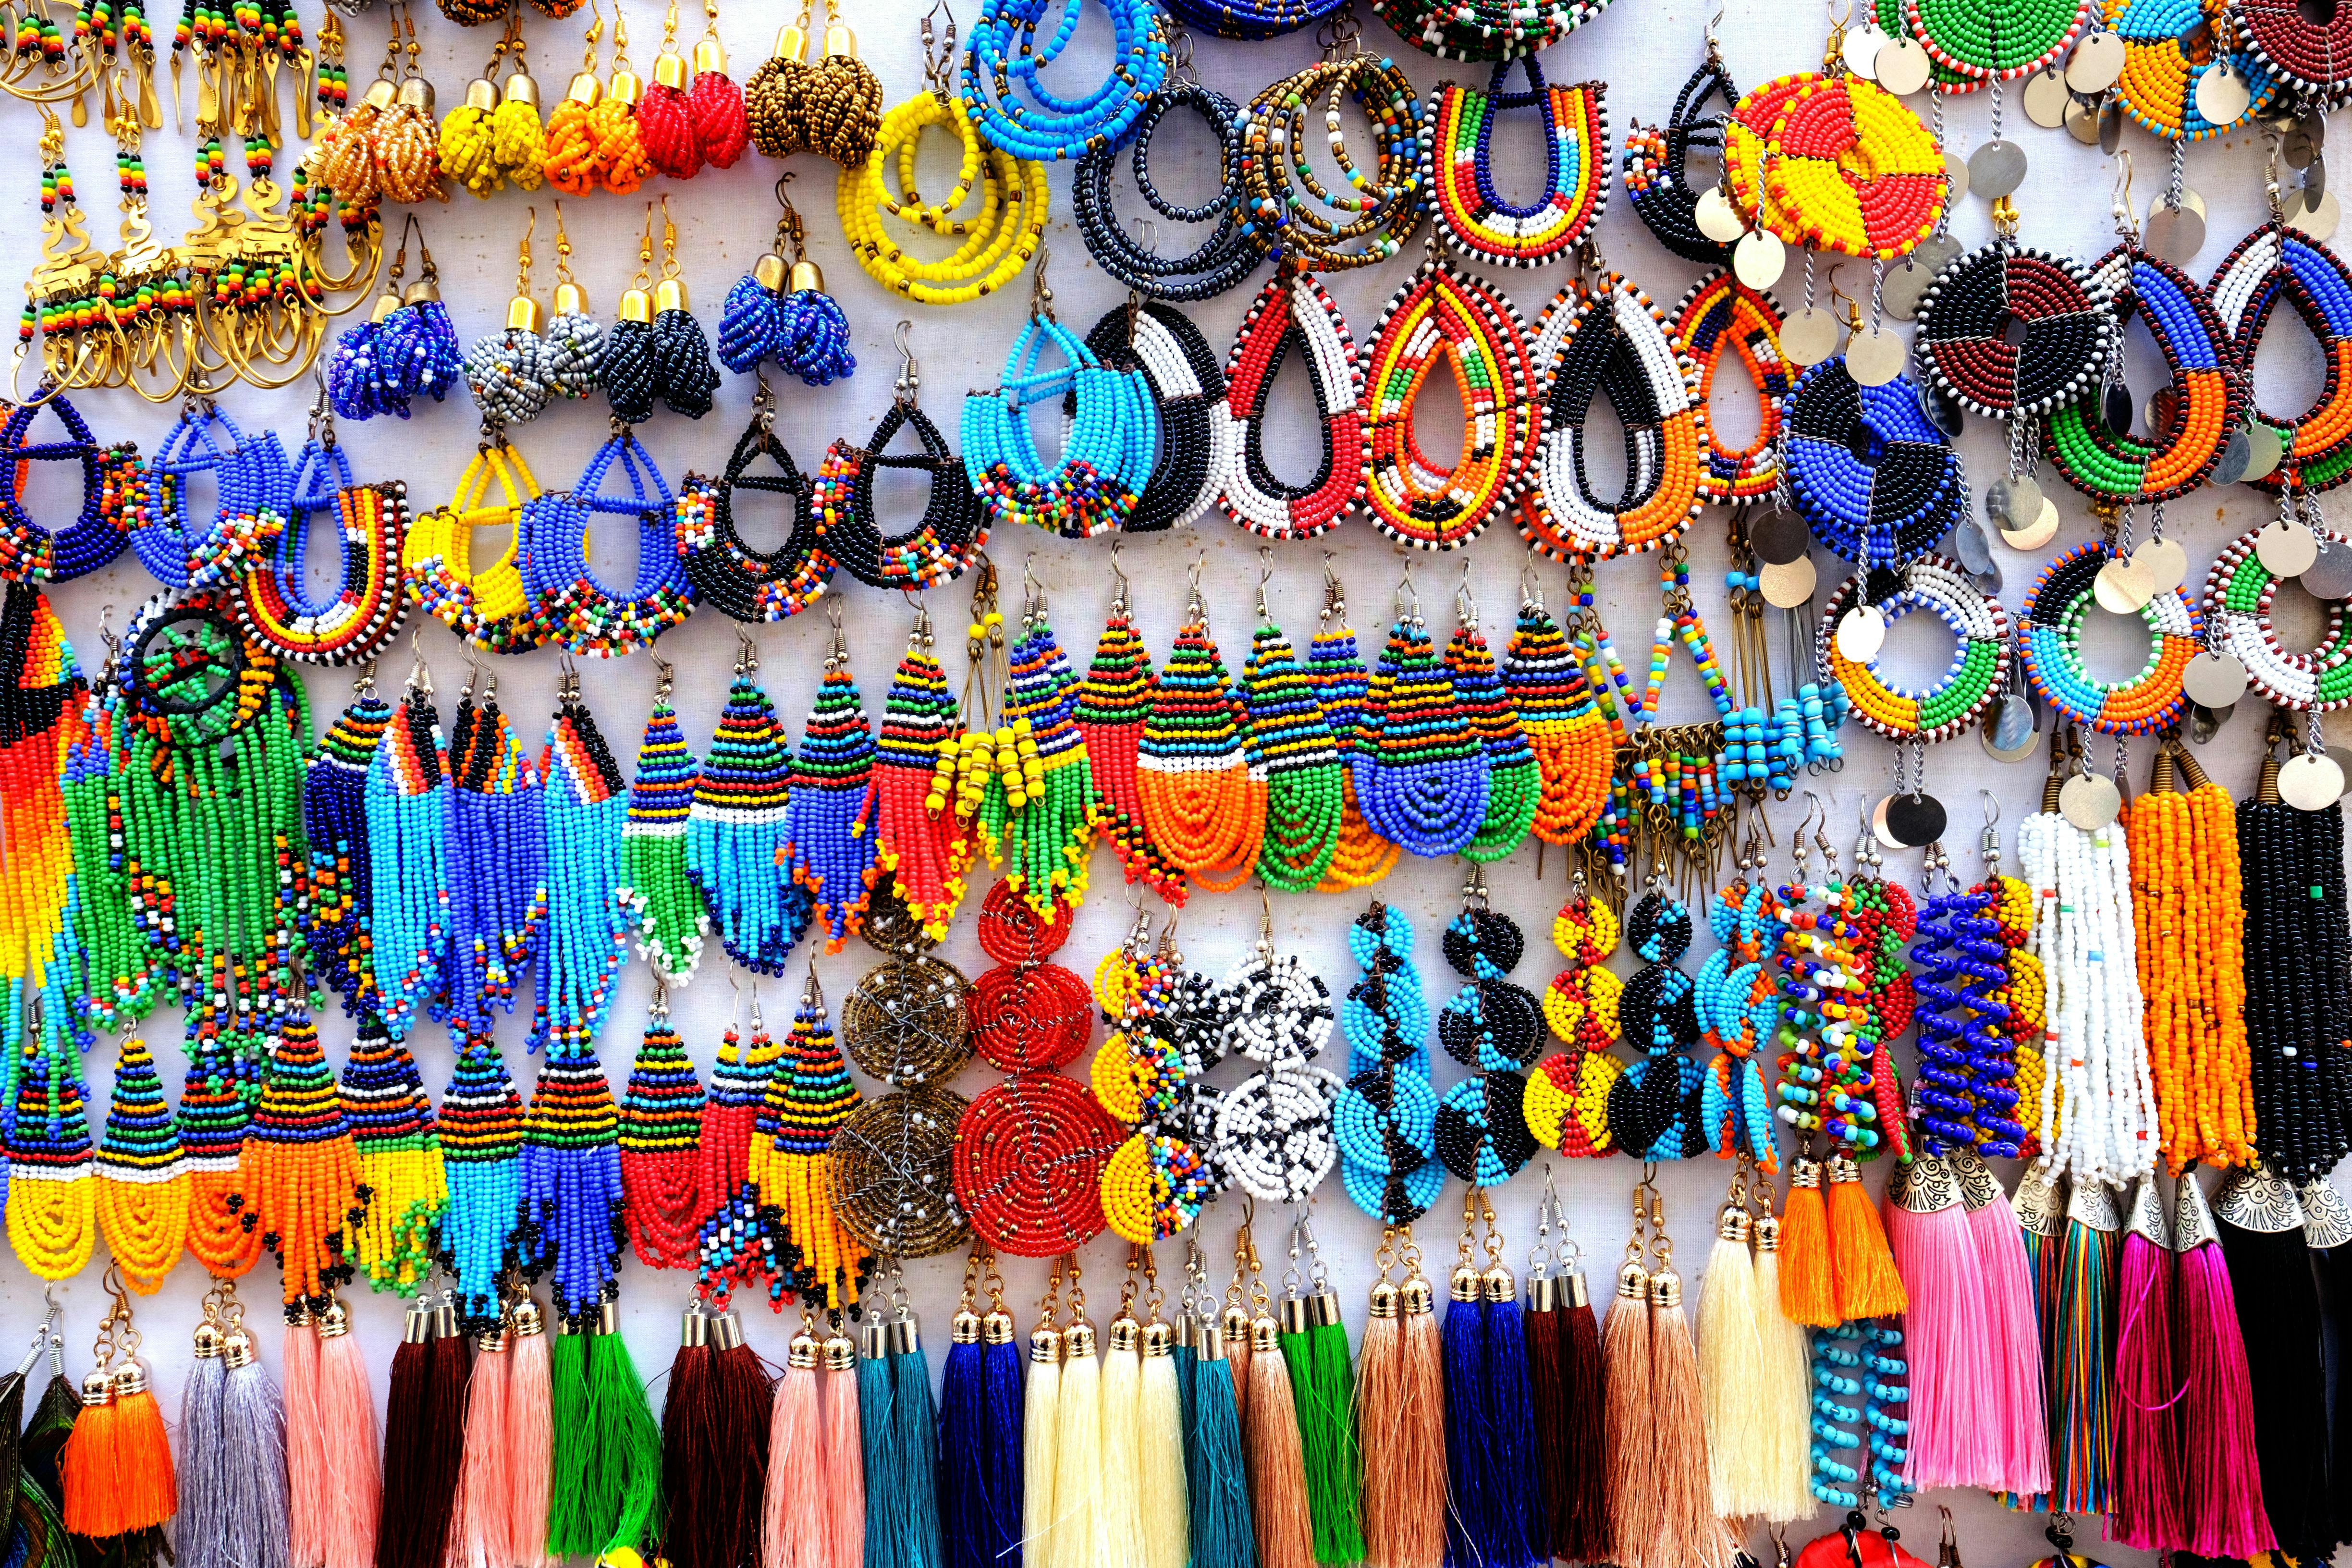 Zanzibar traditions and handcrafts private tour Musement